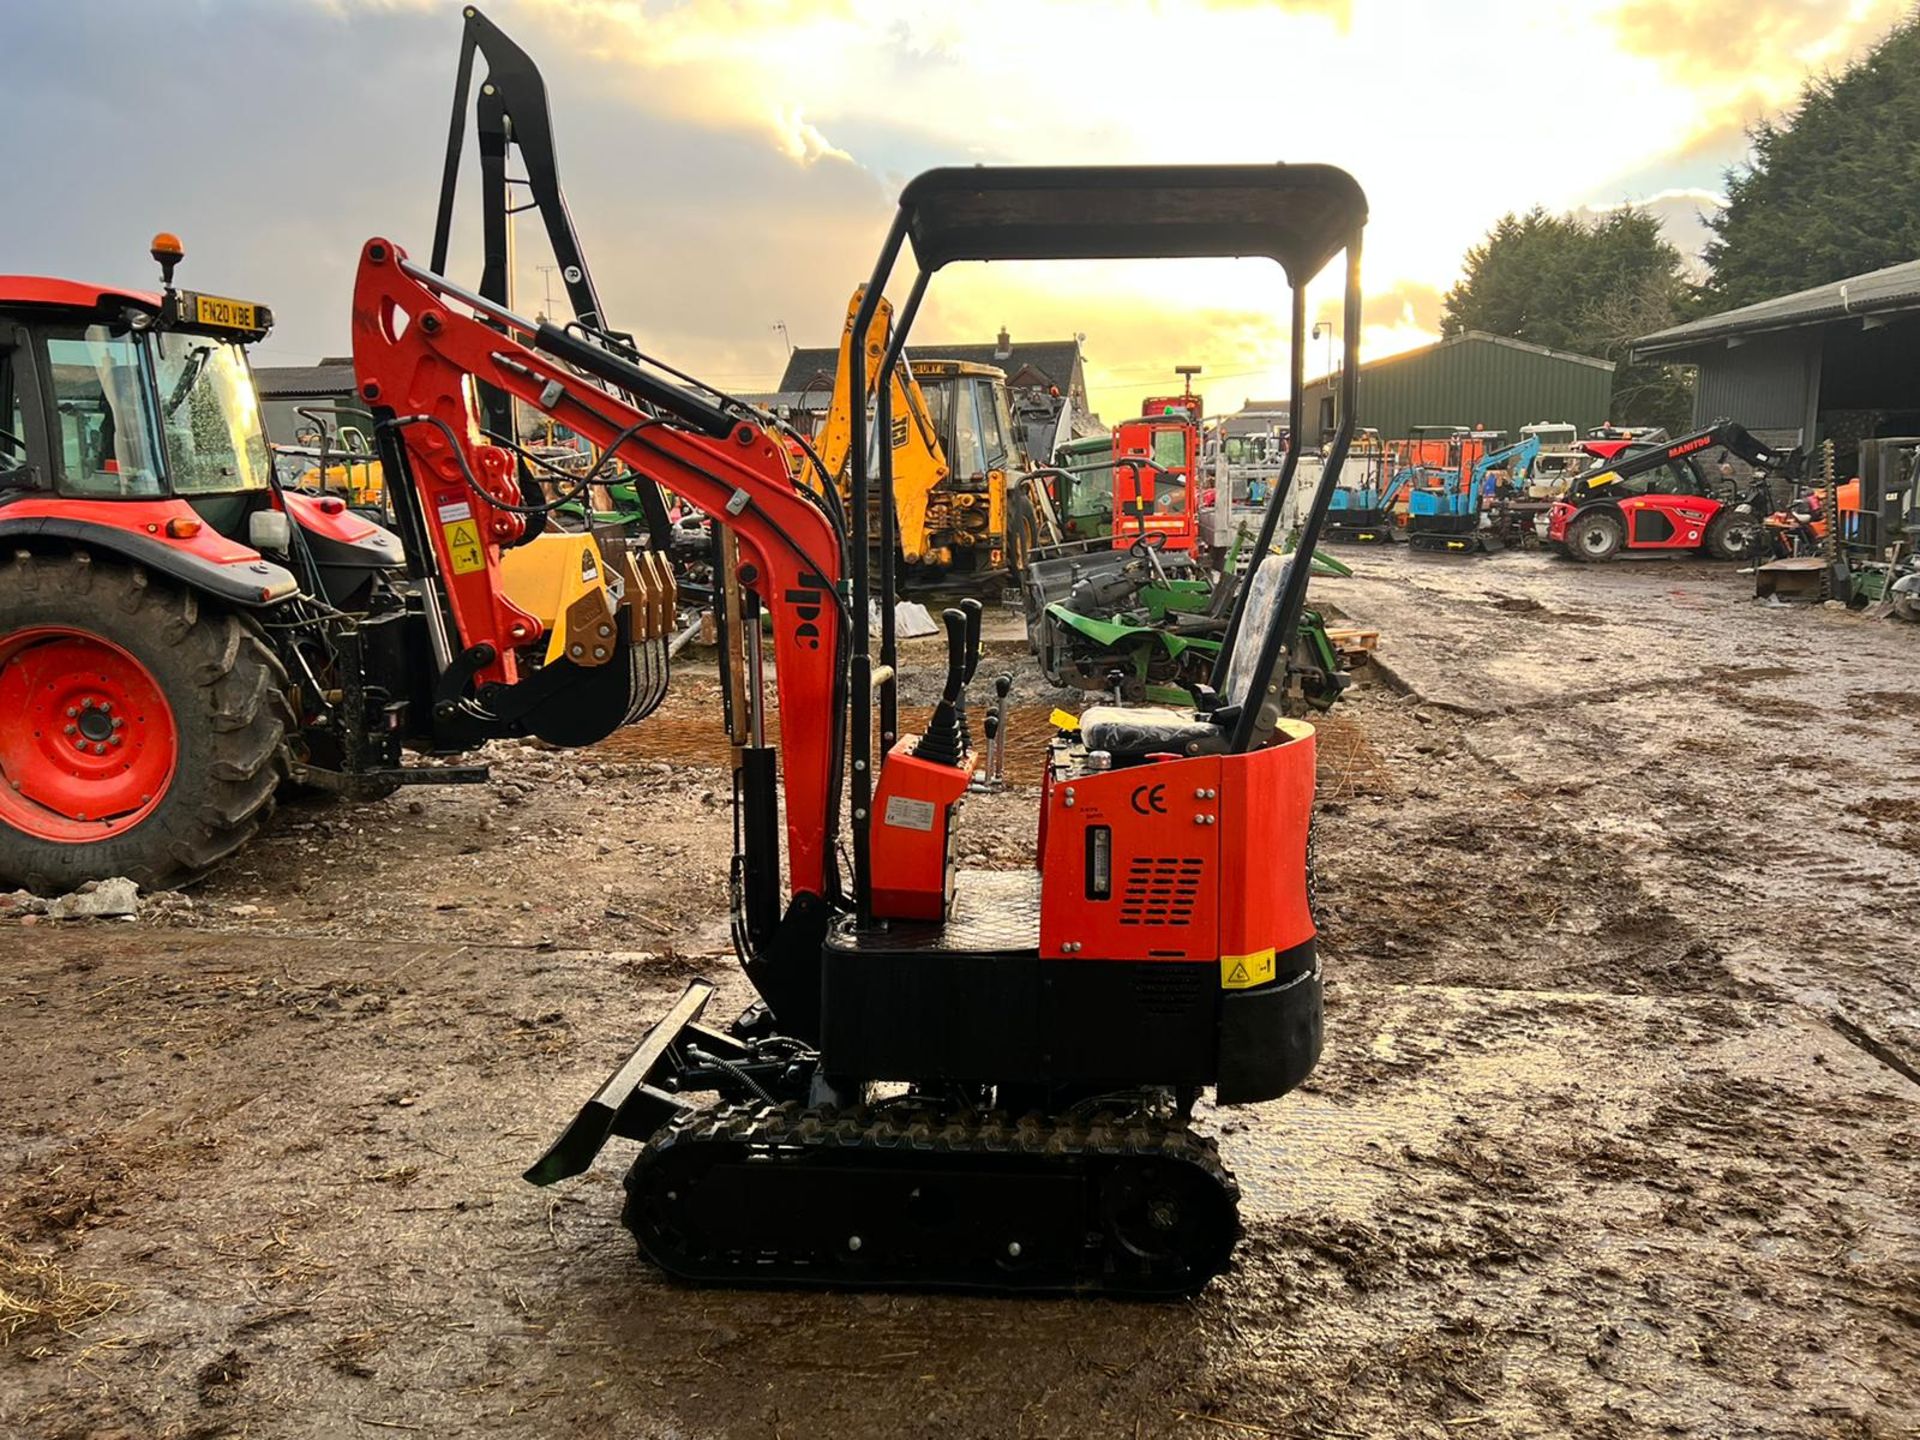 NEW AND UNUSED JPC HT12 1 TON MINI DIGGER, RUNS DRIVES AND DIGS, PIPED FOR FRONT ATTACHMENTS - Image 3 of 11